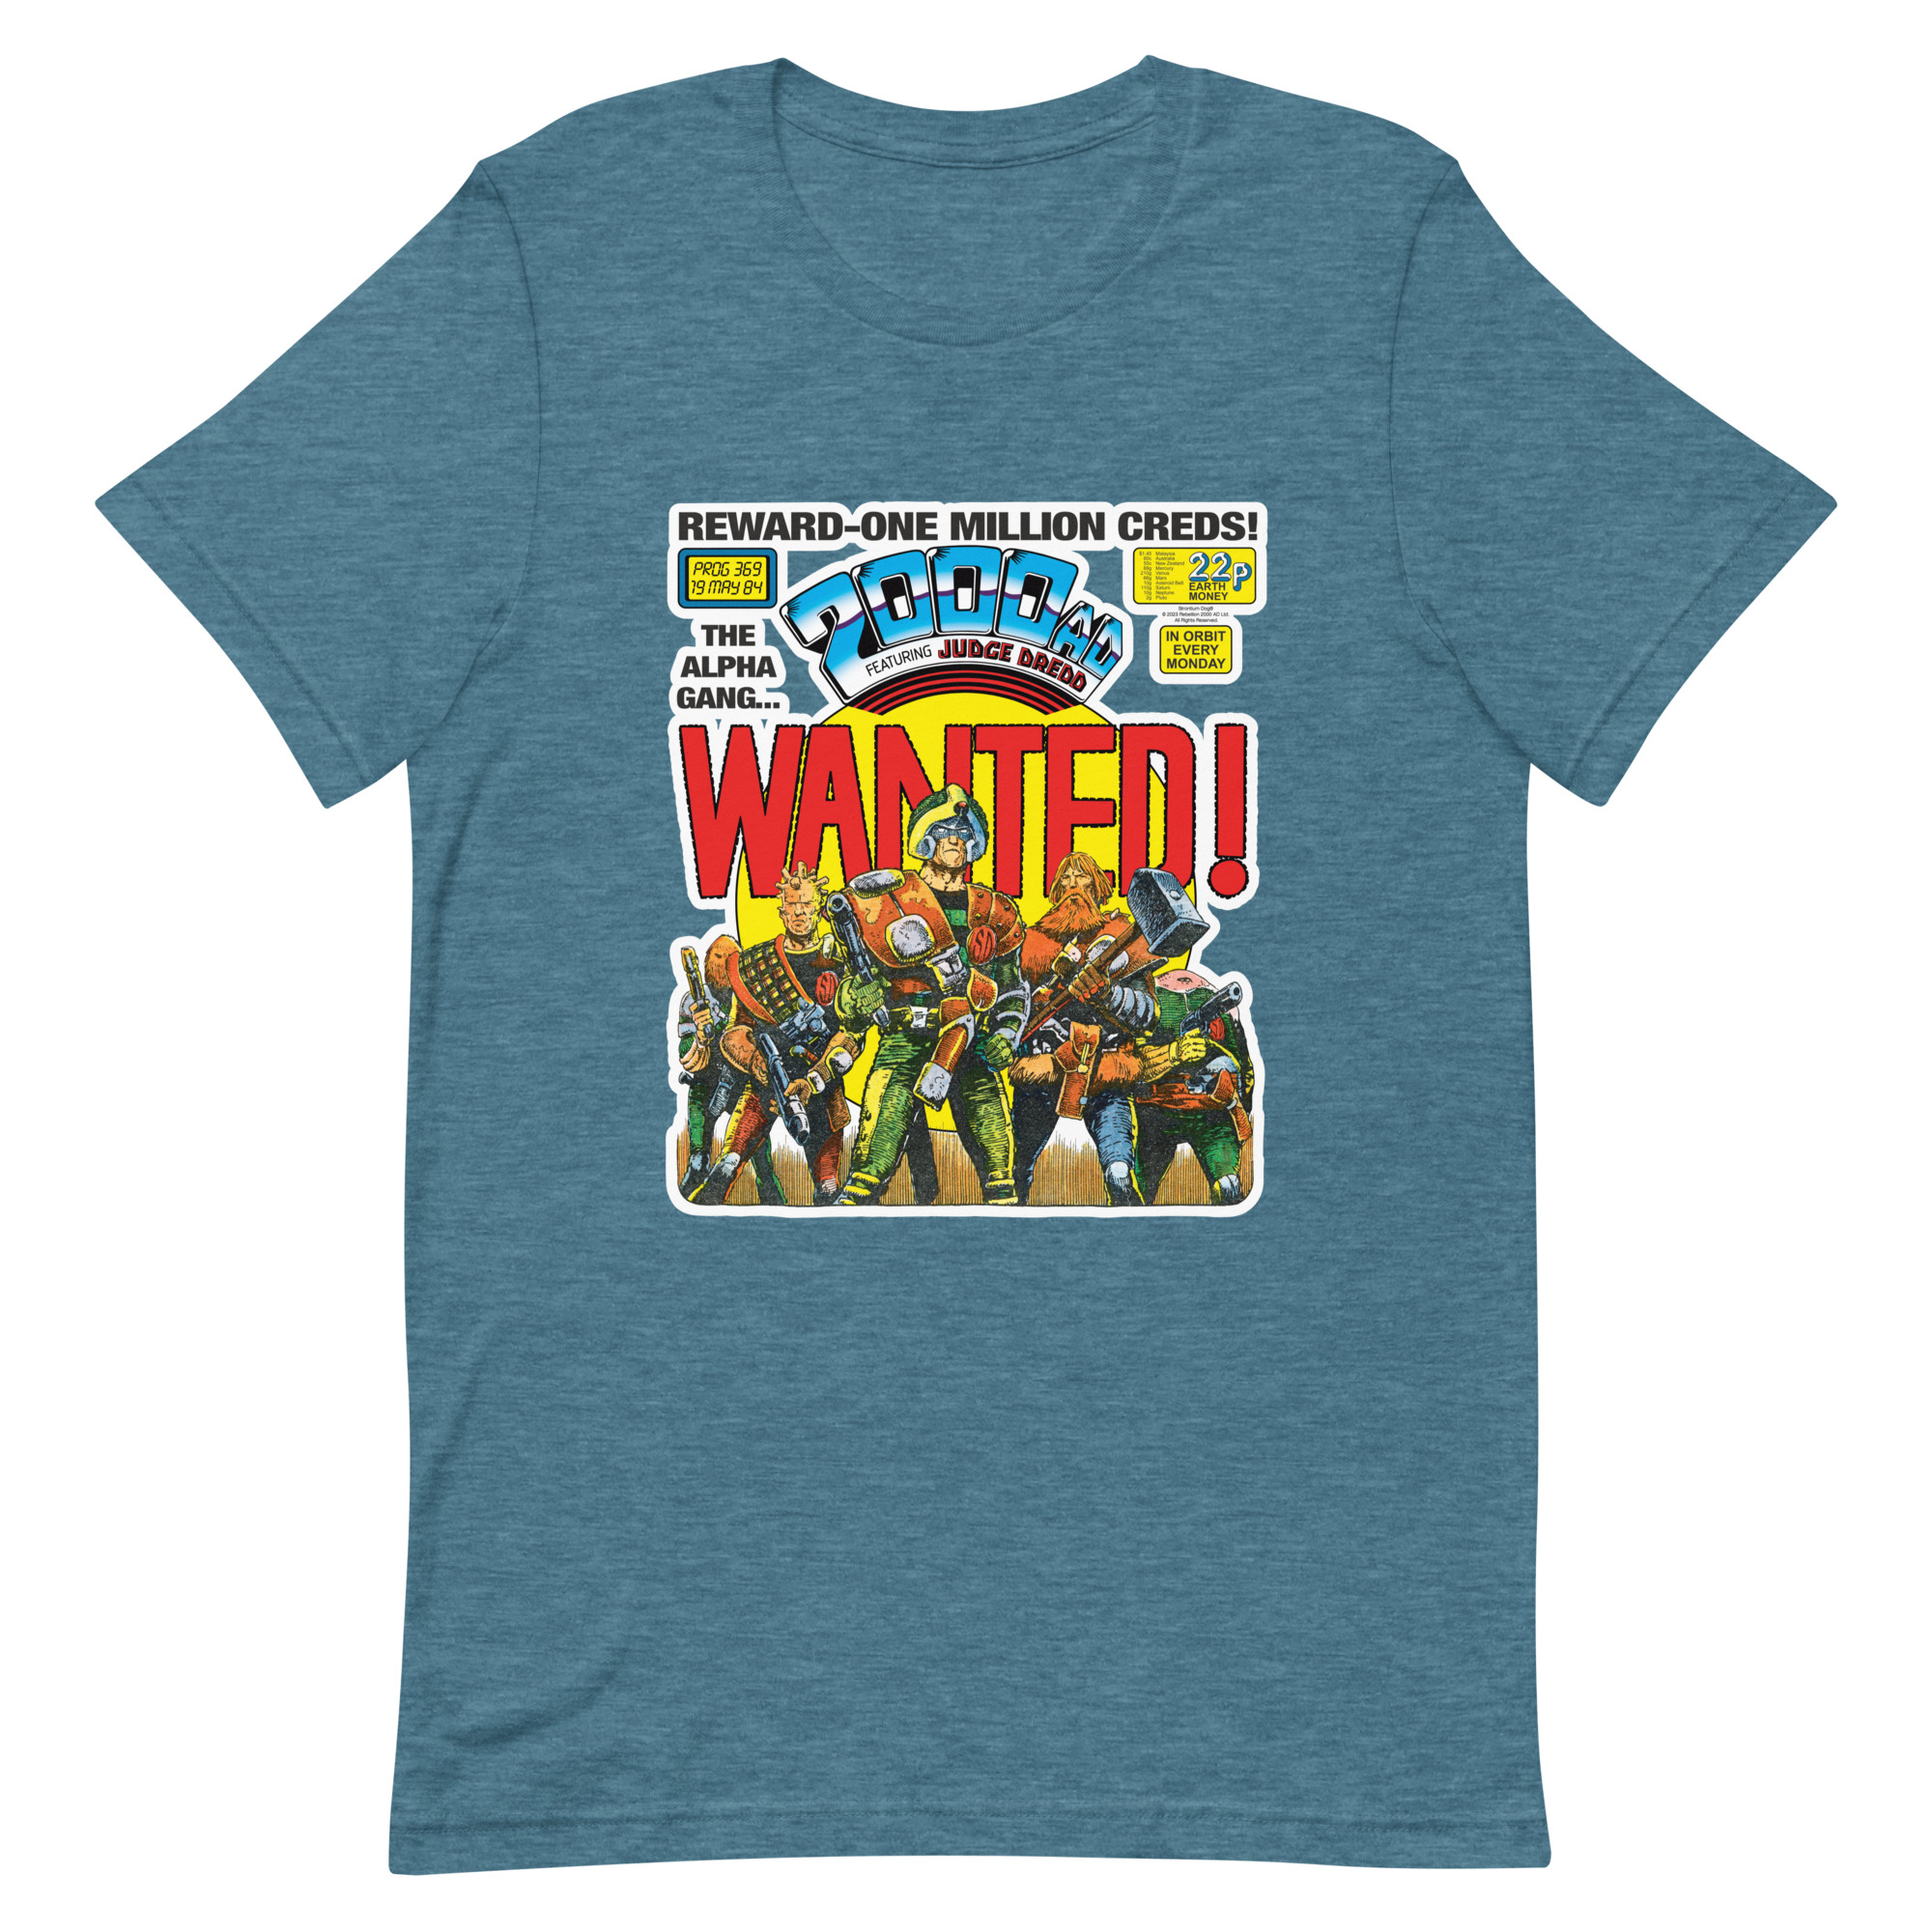 Blue Tshirt with a 'Classic' 2000 AD Cover image on the chest. In the image Strontium Dog and his team, the Alpha gang, stand ready.